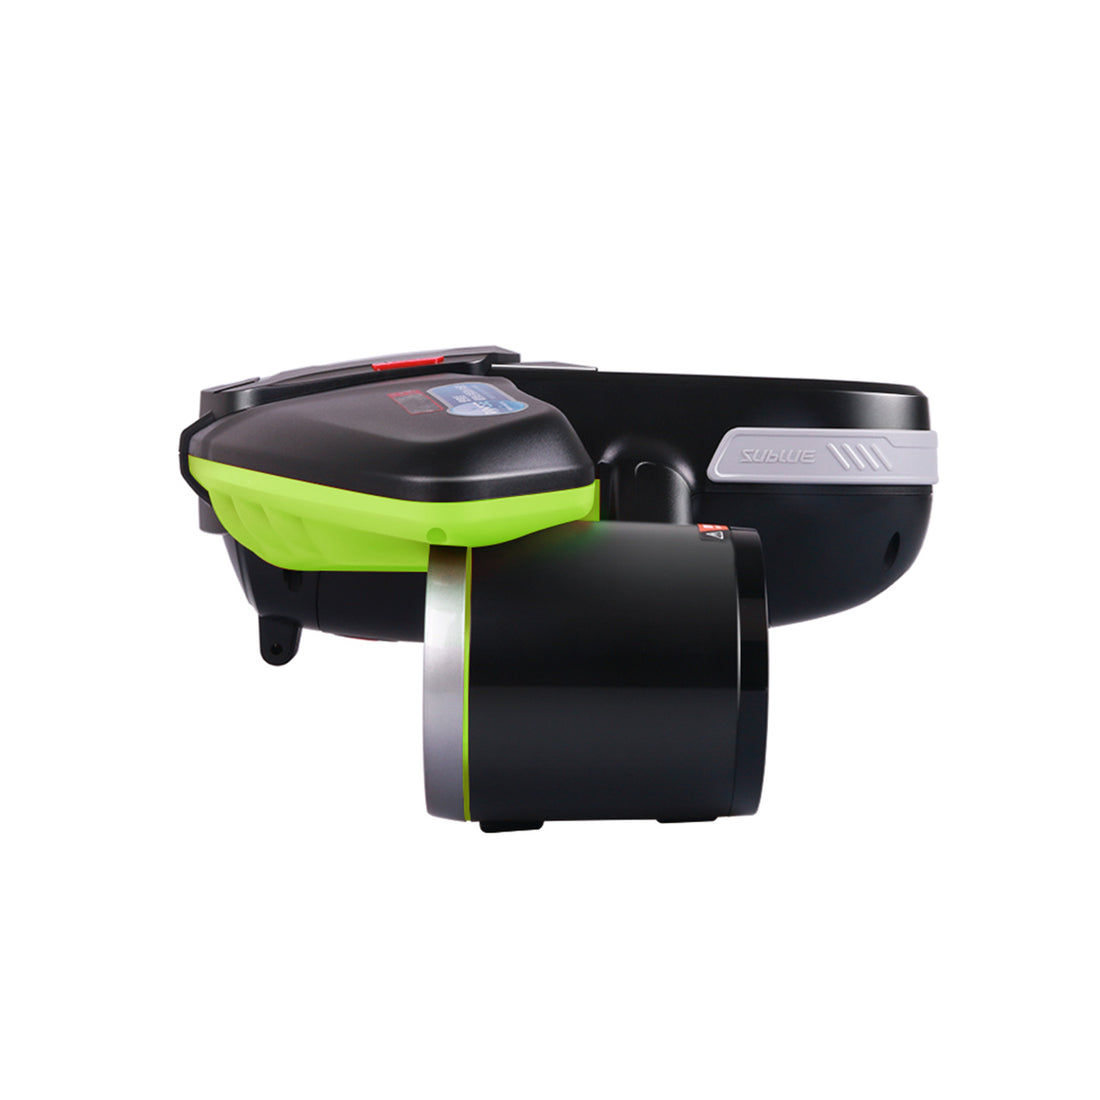 Sublue, Underwater Scooter , Compass and Camera Mount, Motor Scooter for Adults & Kids, Smart Scooter, Diving, Snorkeling, Green